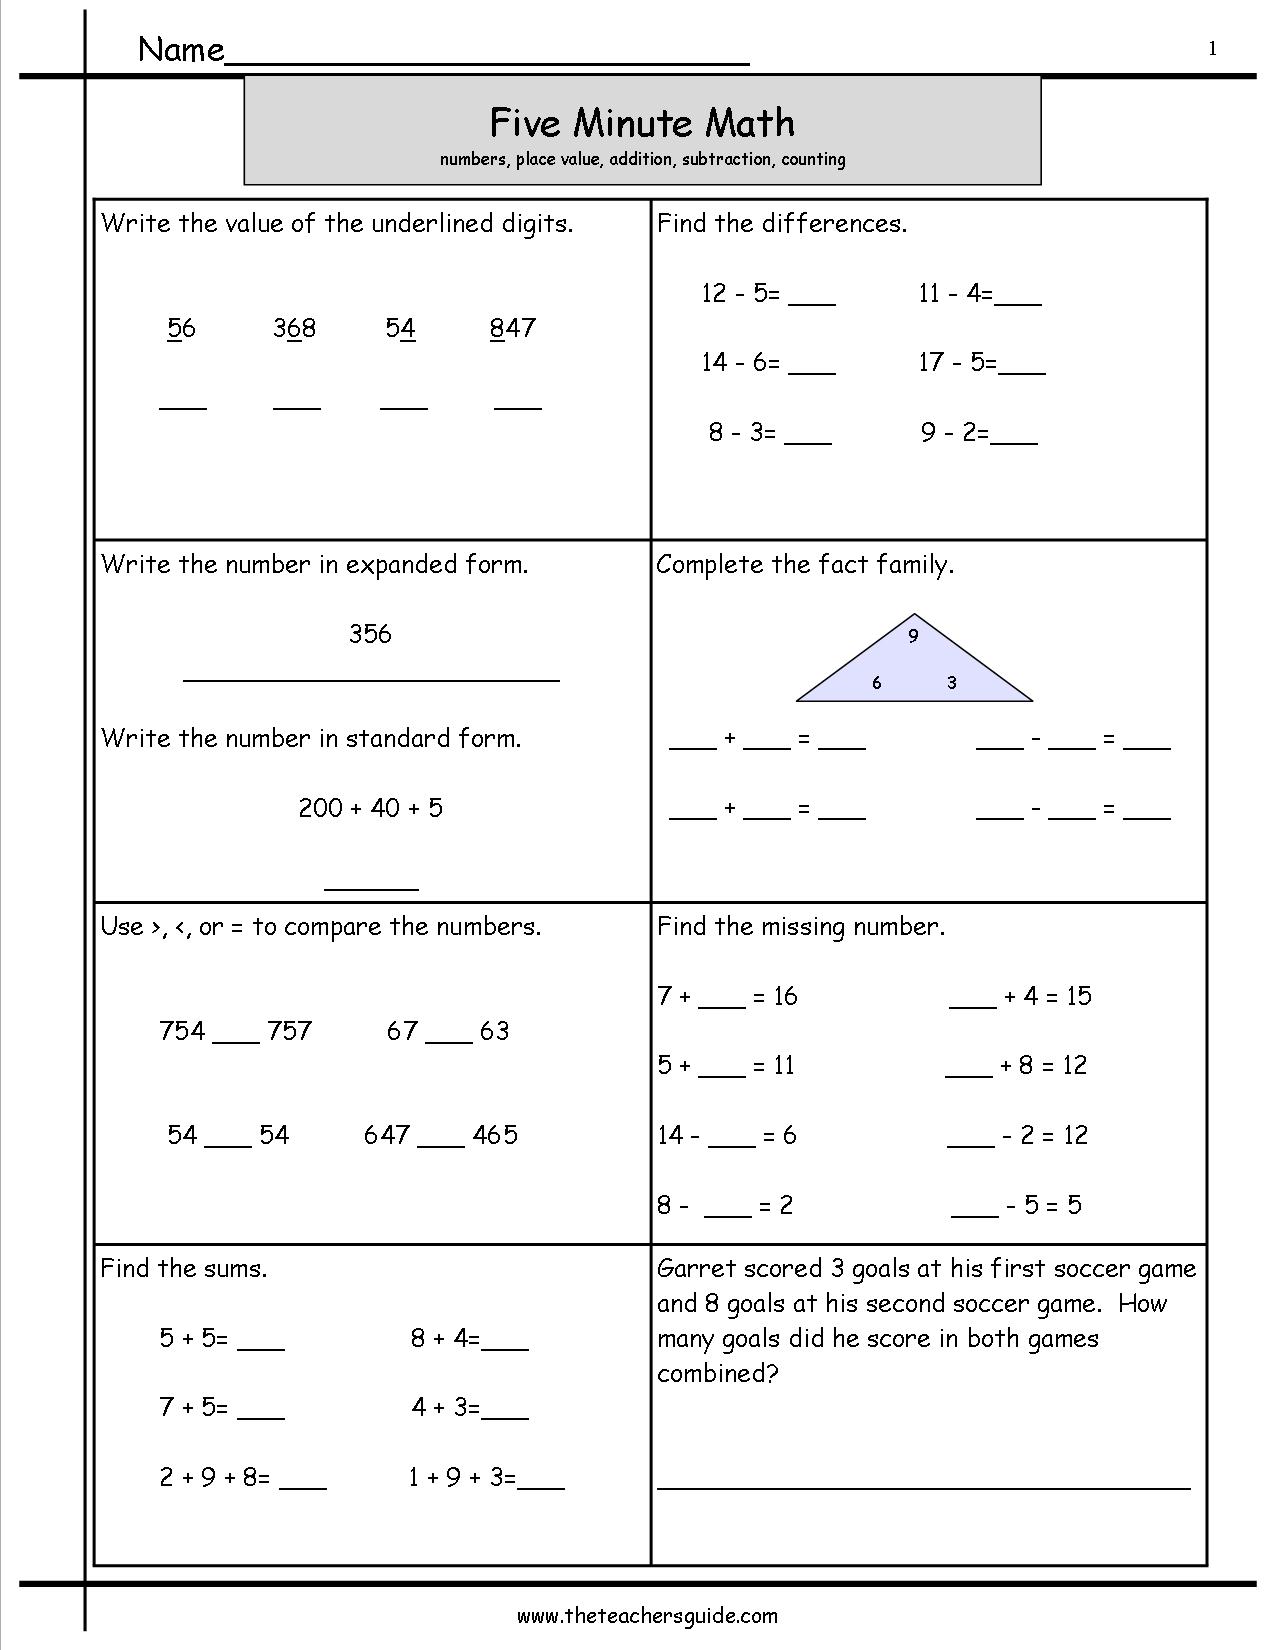 Five Minute Math Review Worksheets from The Teacher's Guide